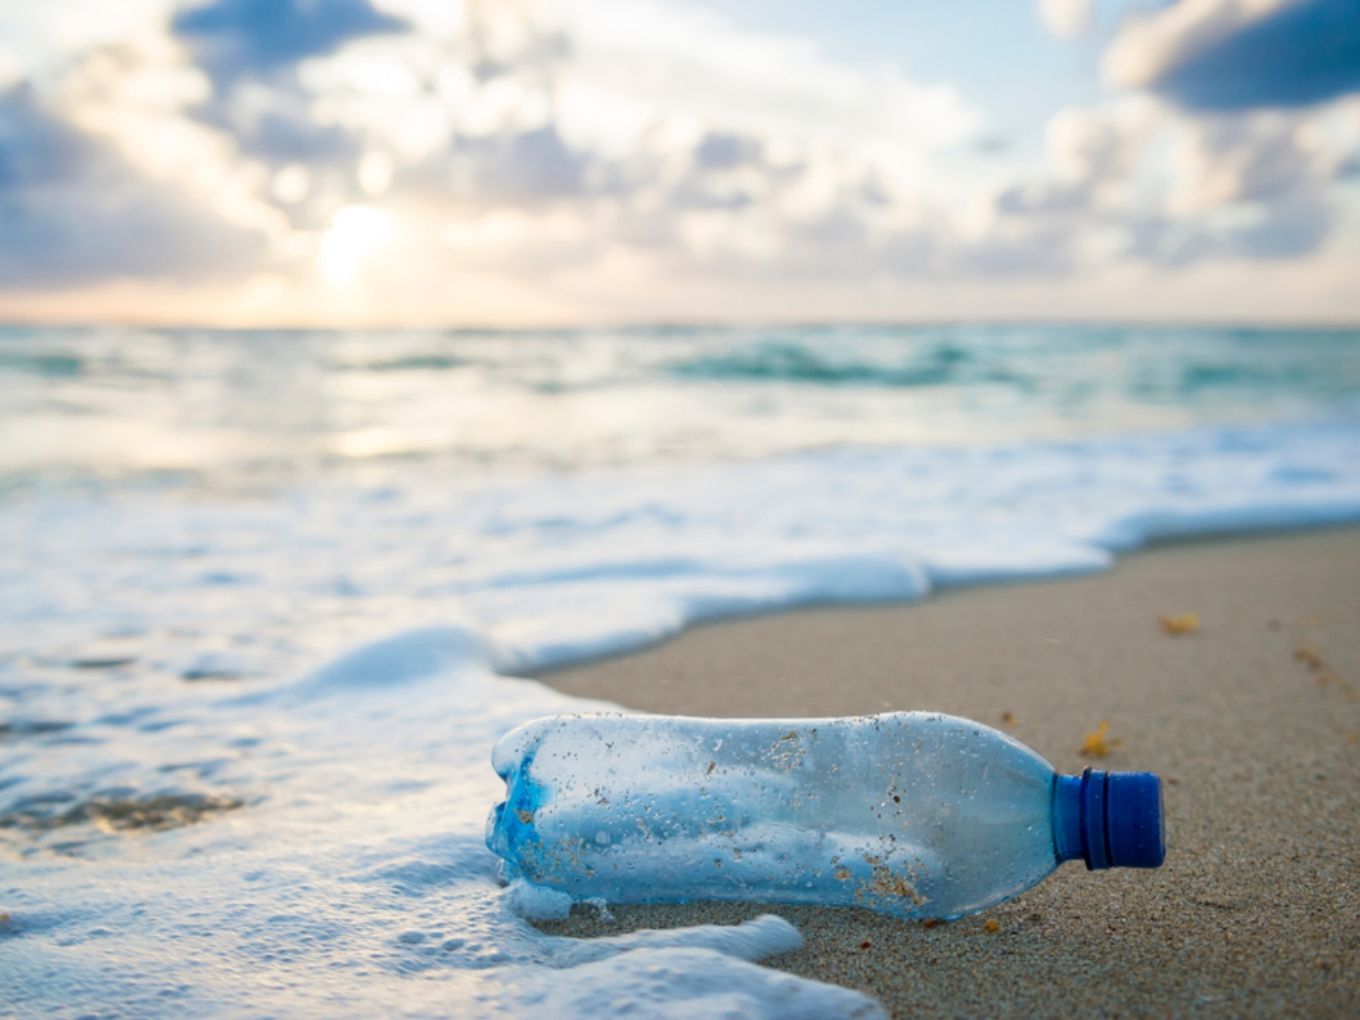 Govt Organises Challenge For Startups To Discard Single-Use Plastic